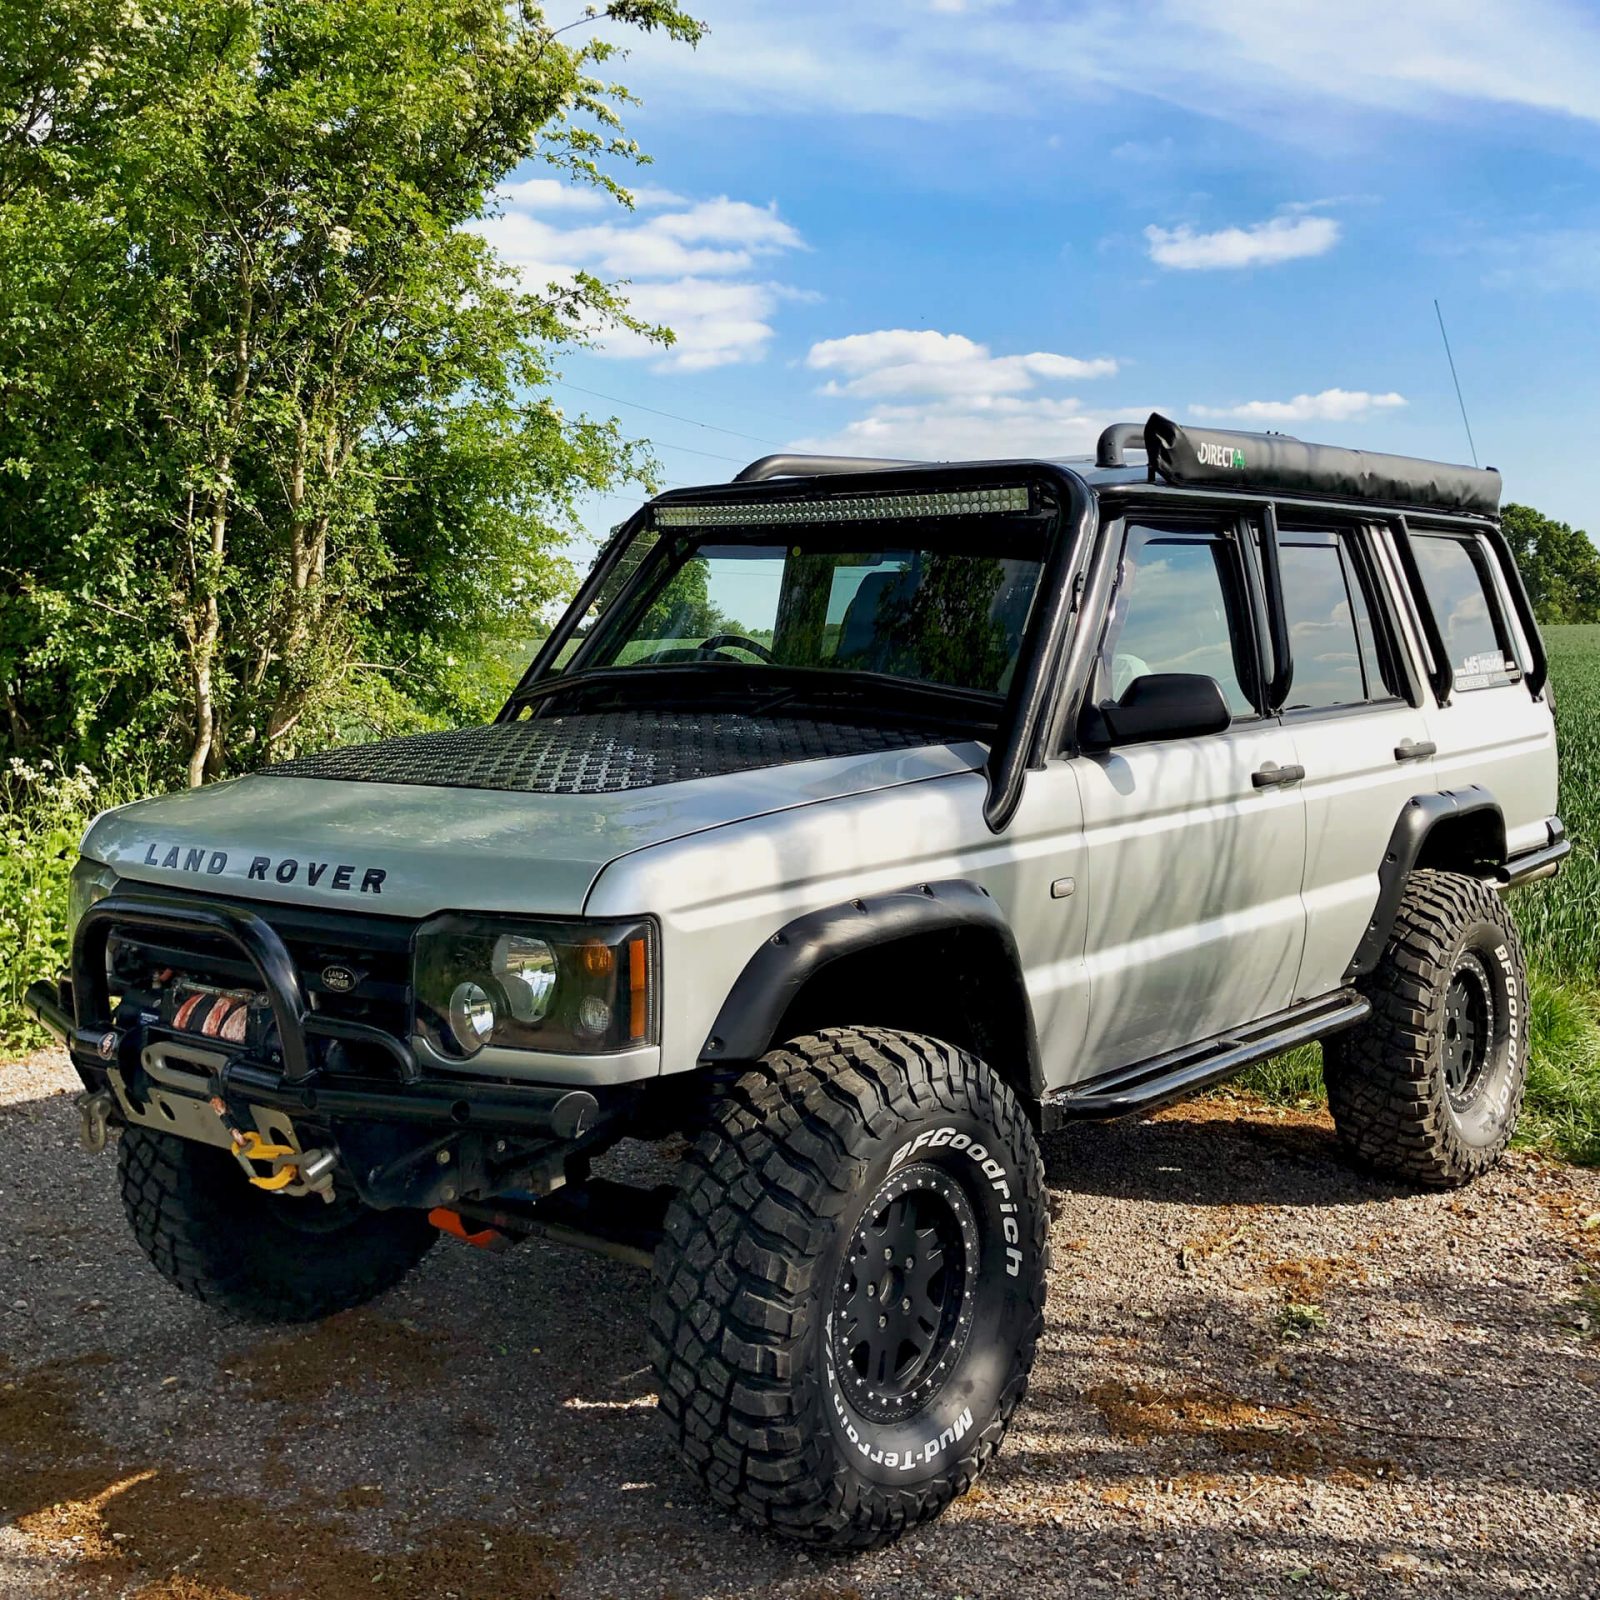 Lifted Land Rover Discovery 2 on 35 inch tires